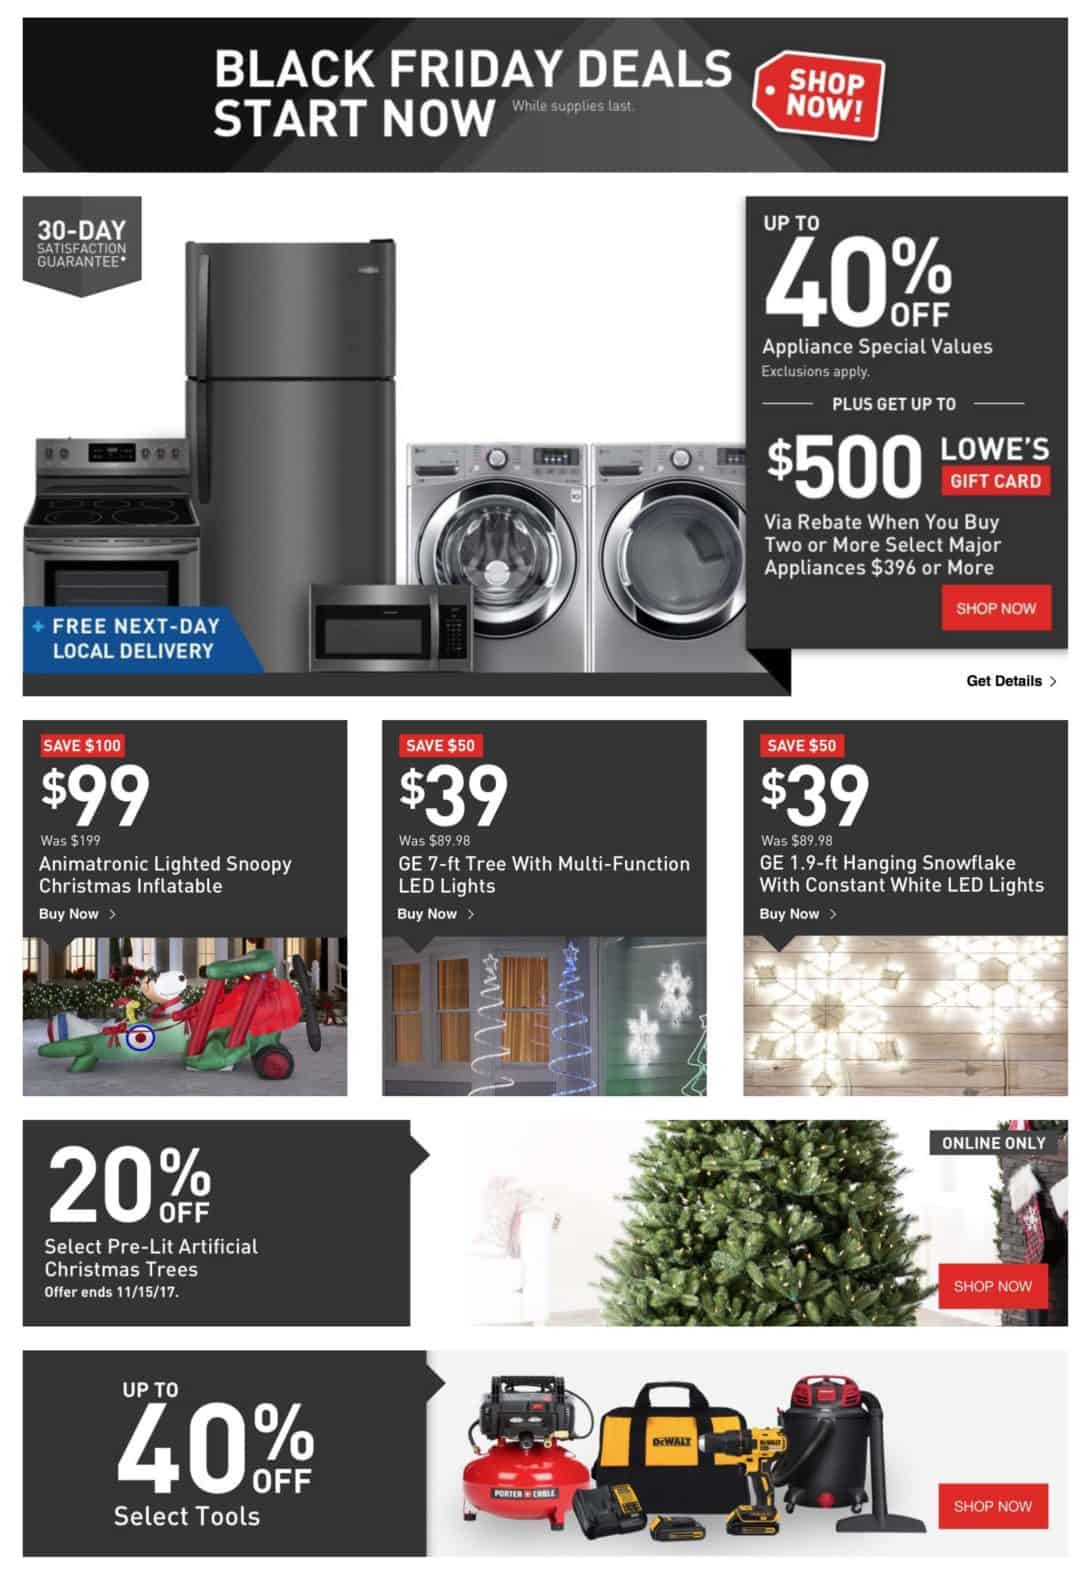 Black Friday Deals at Lowe's